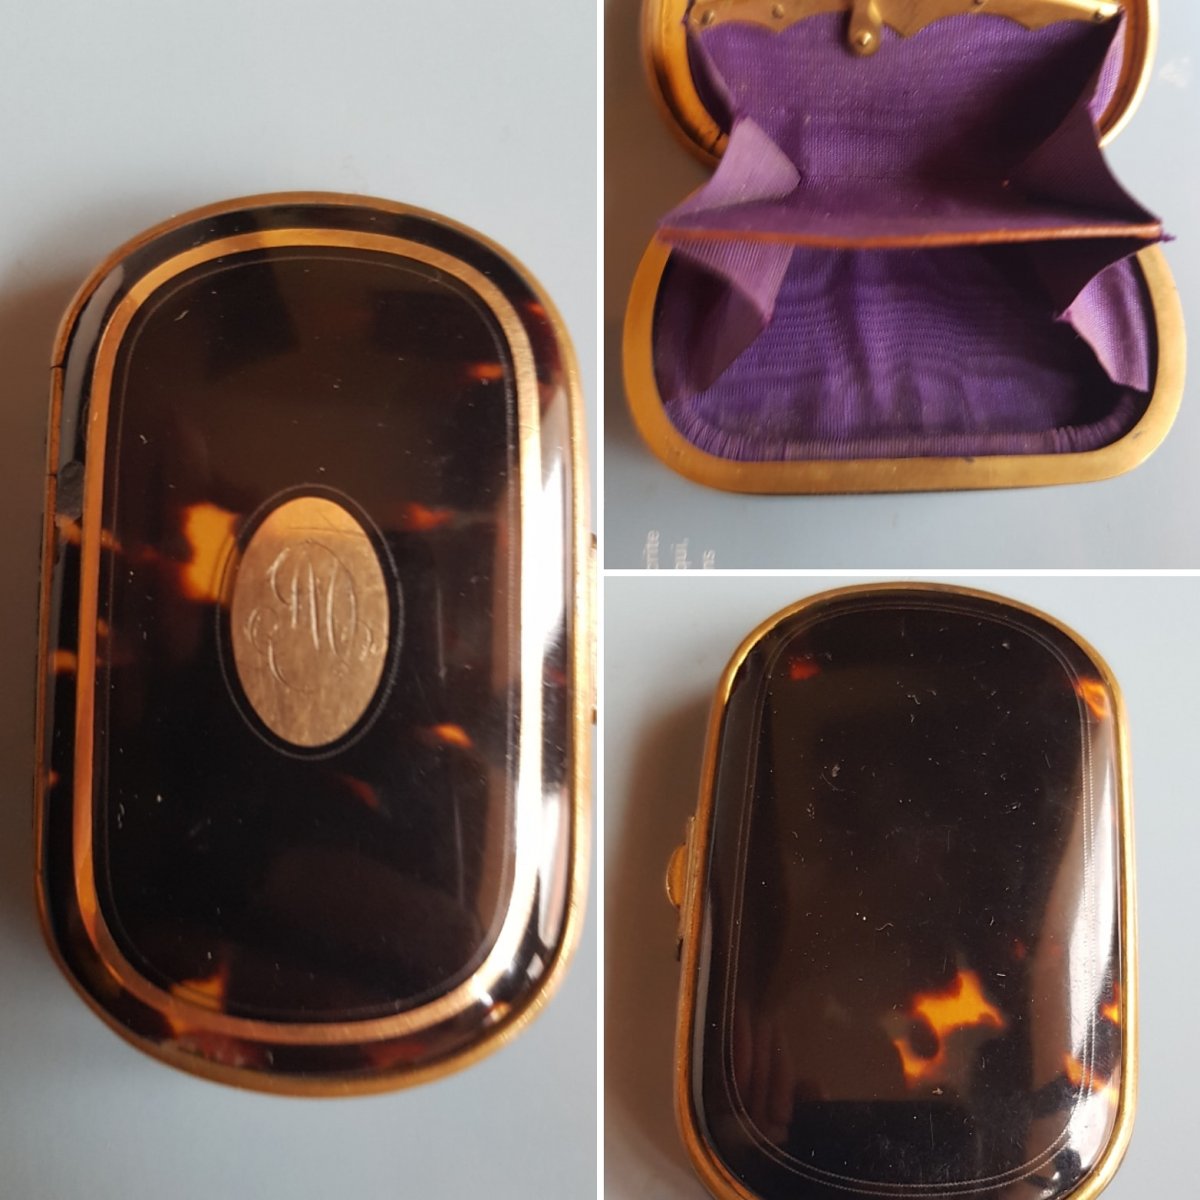 Napoleon III Scale And Gold Coin Purse